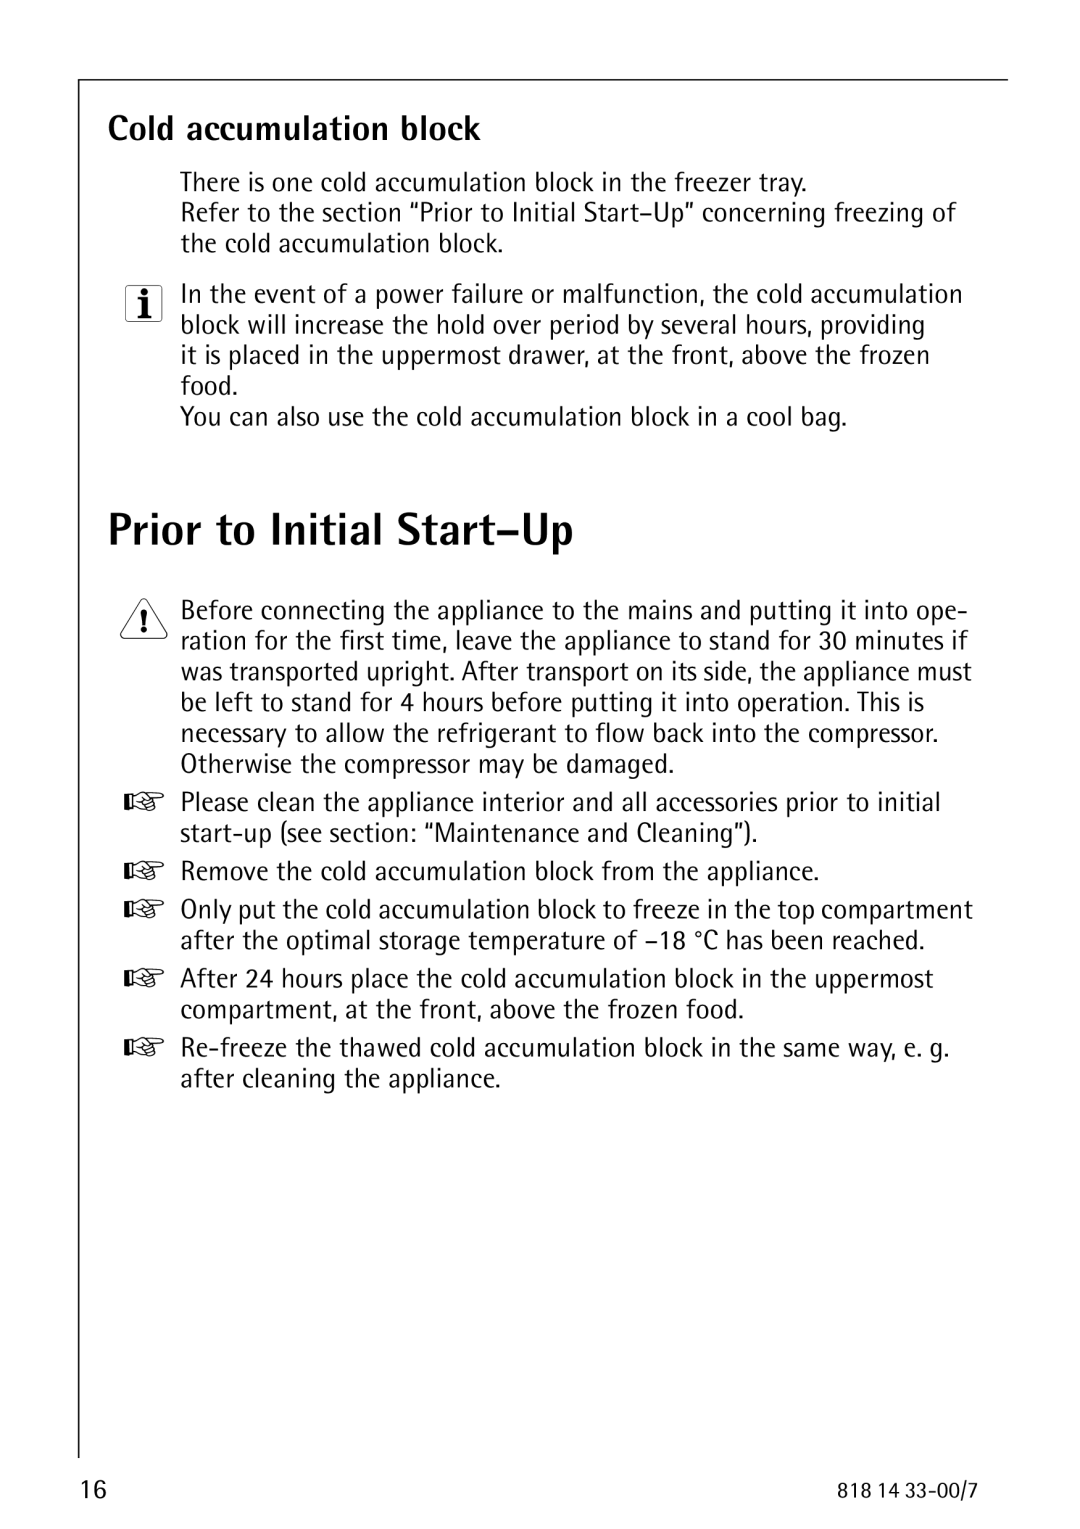 Electrolux 2170-4 operating instructions Prior to Initial Start-Up, Cold accumulation block 